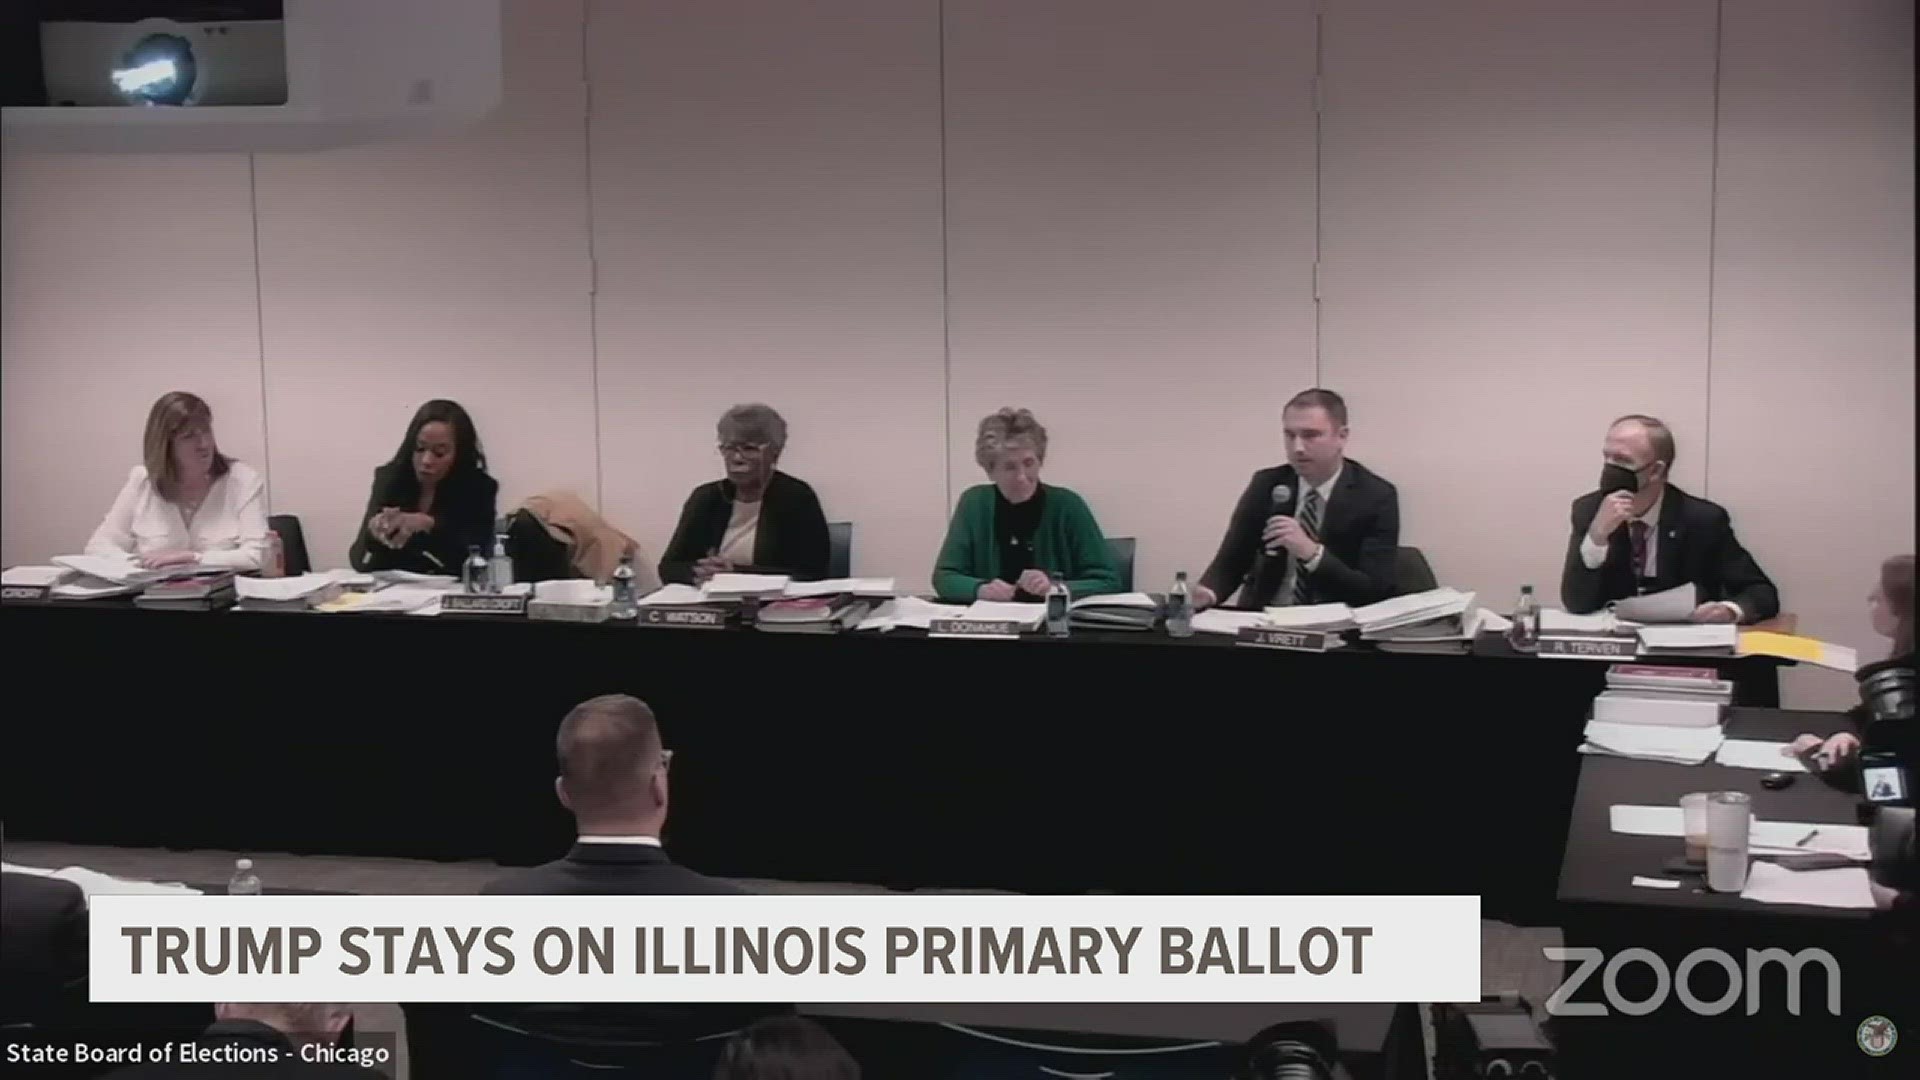 The state's election board unanimously voted to keep the former president on the ballot, saying they don't have the jurisdiction to make a decision.